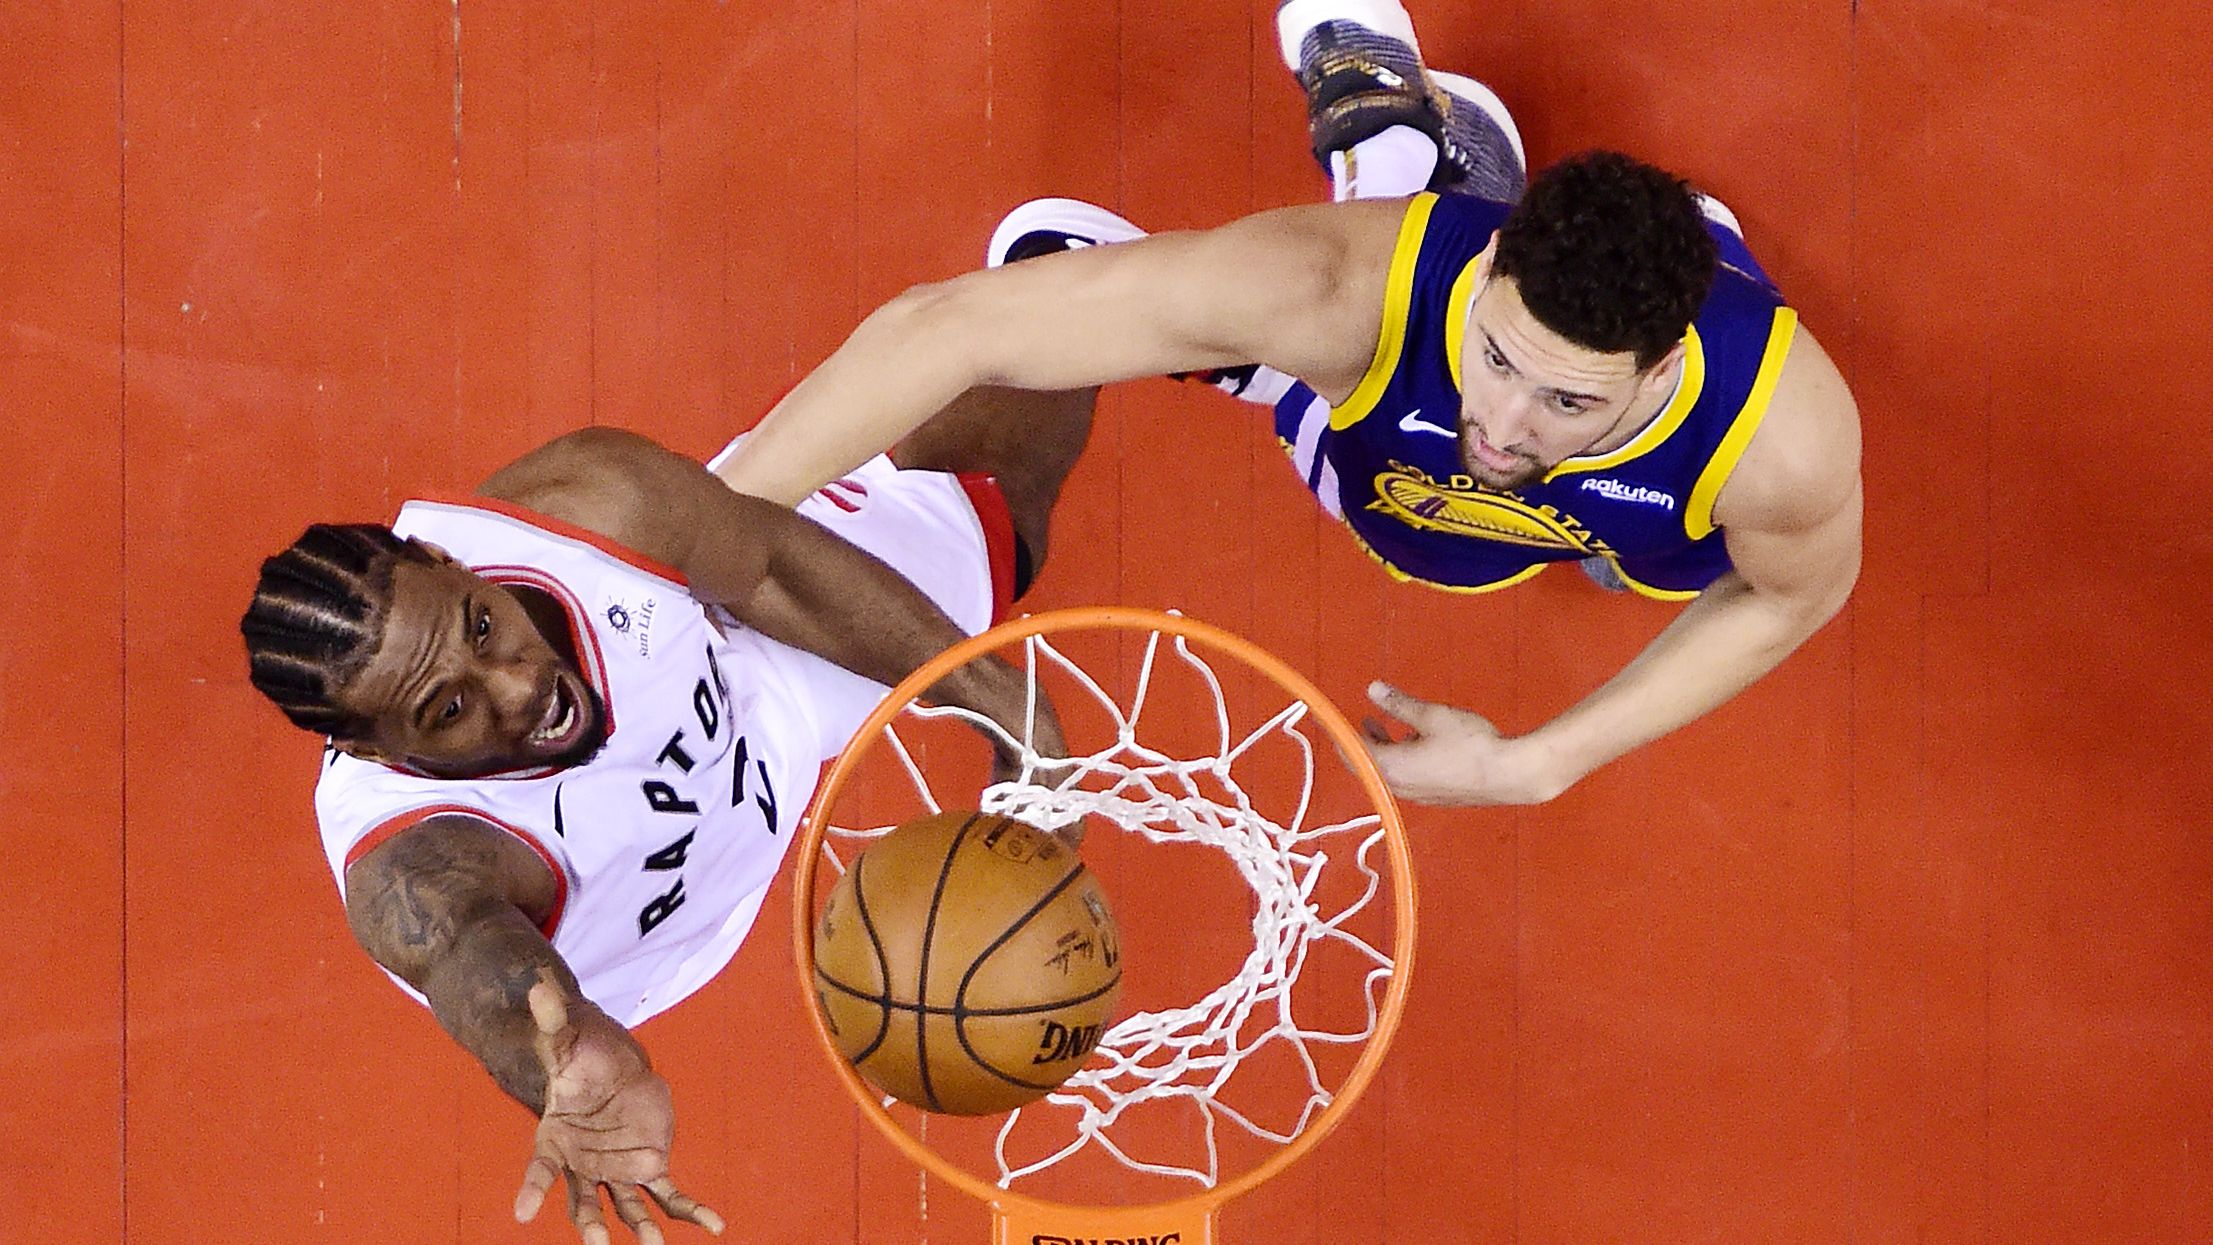 Kawhi Leonard #2 of the Toronto Raptors attempts a shot against Klay Thompson #11 of the Golden State Warriors 